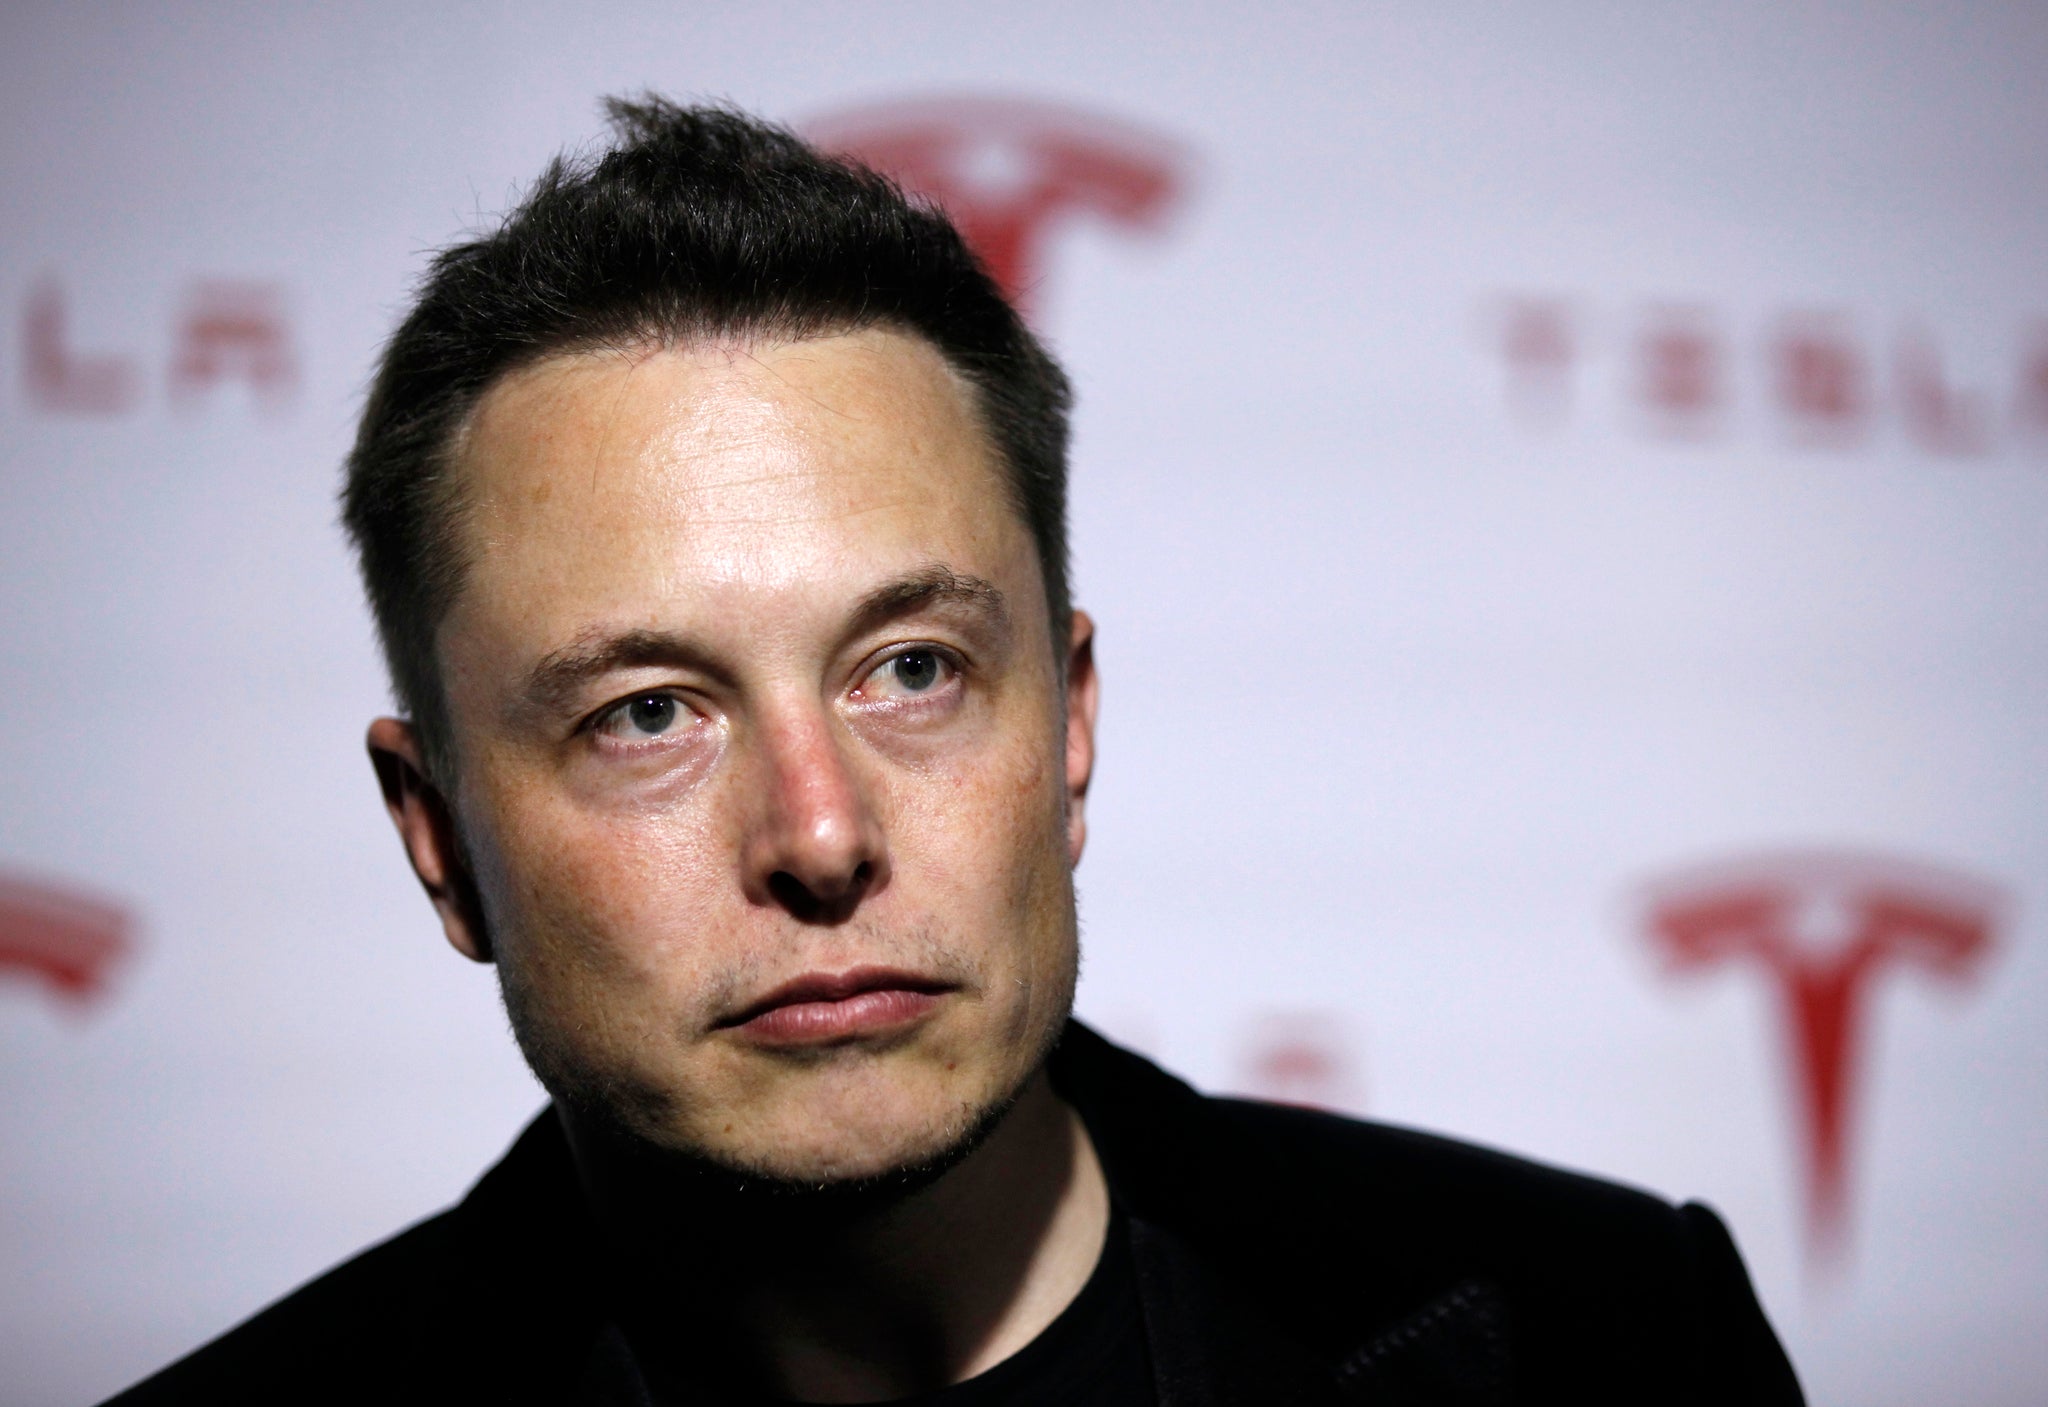 Tesla Motors Inc CEO Elon Musk talks about Tesla's new battery swapping program in Hawthorne, California June 20, 2013. Tesla Motors Inc on Thursday unveiled a system to swap battery packs in its electric cars in about 90 seconds, a service Musk said will